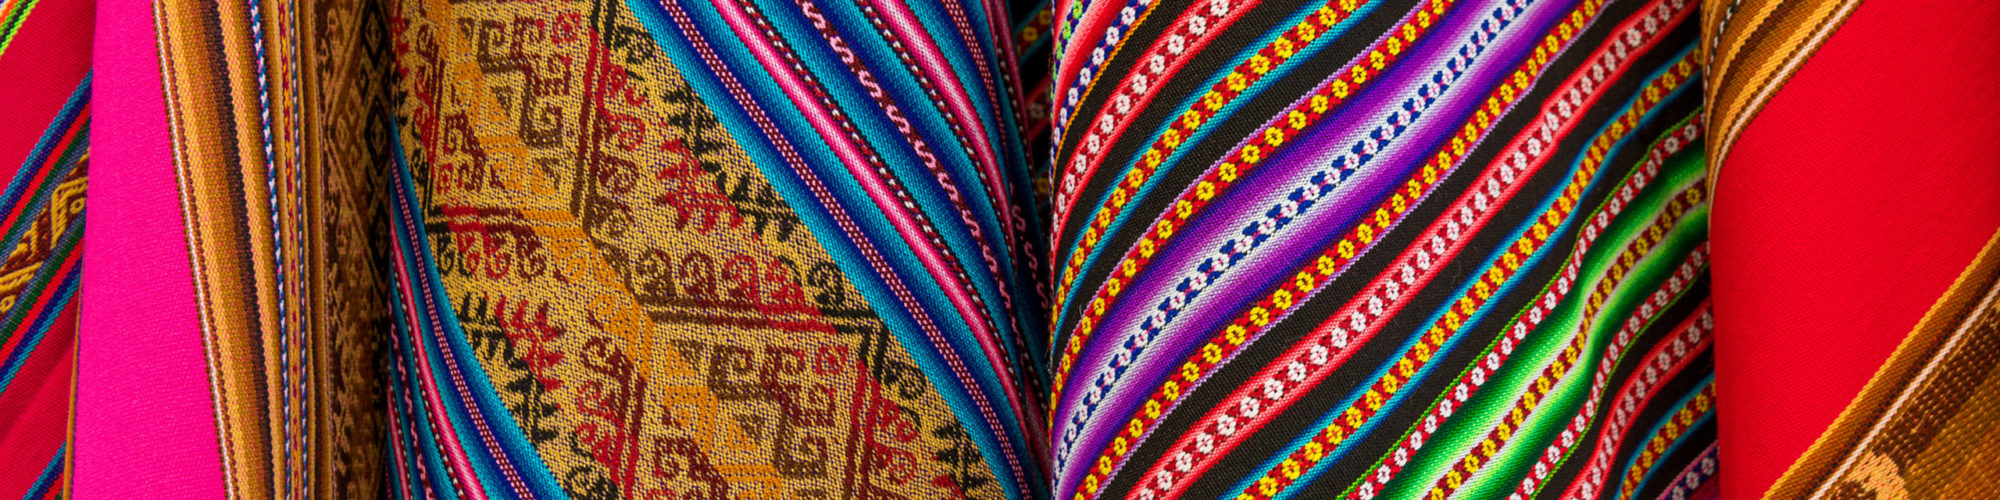 Otavalo travel agents packages deals